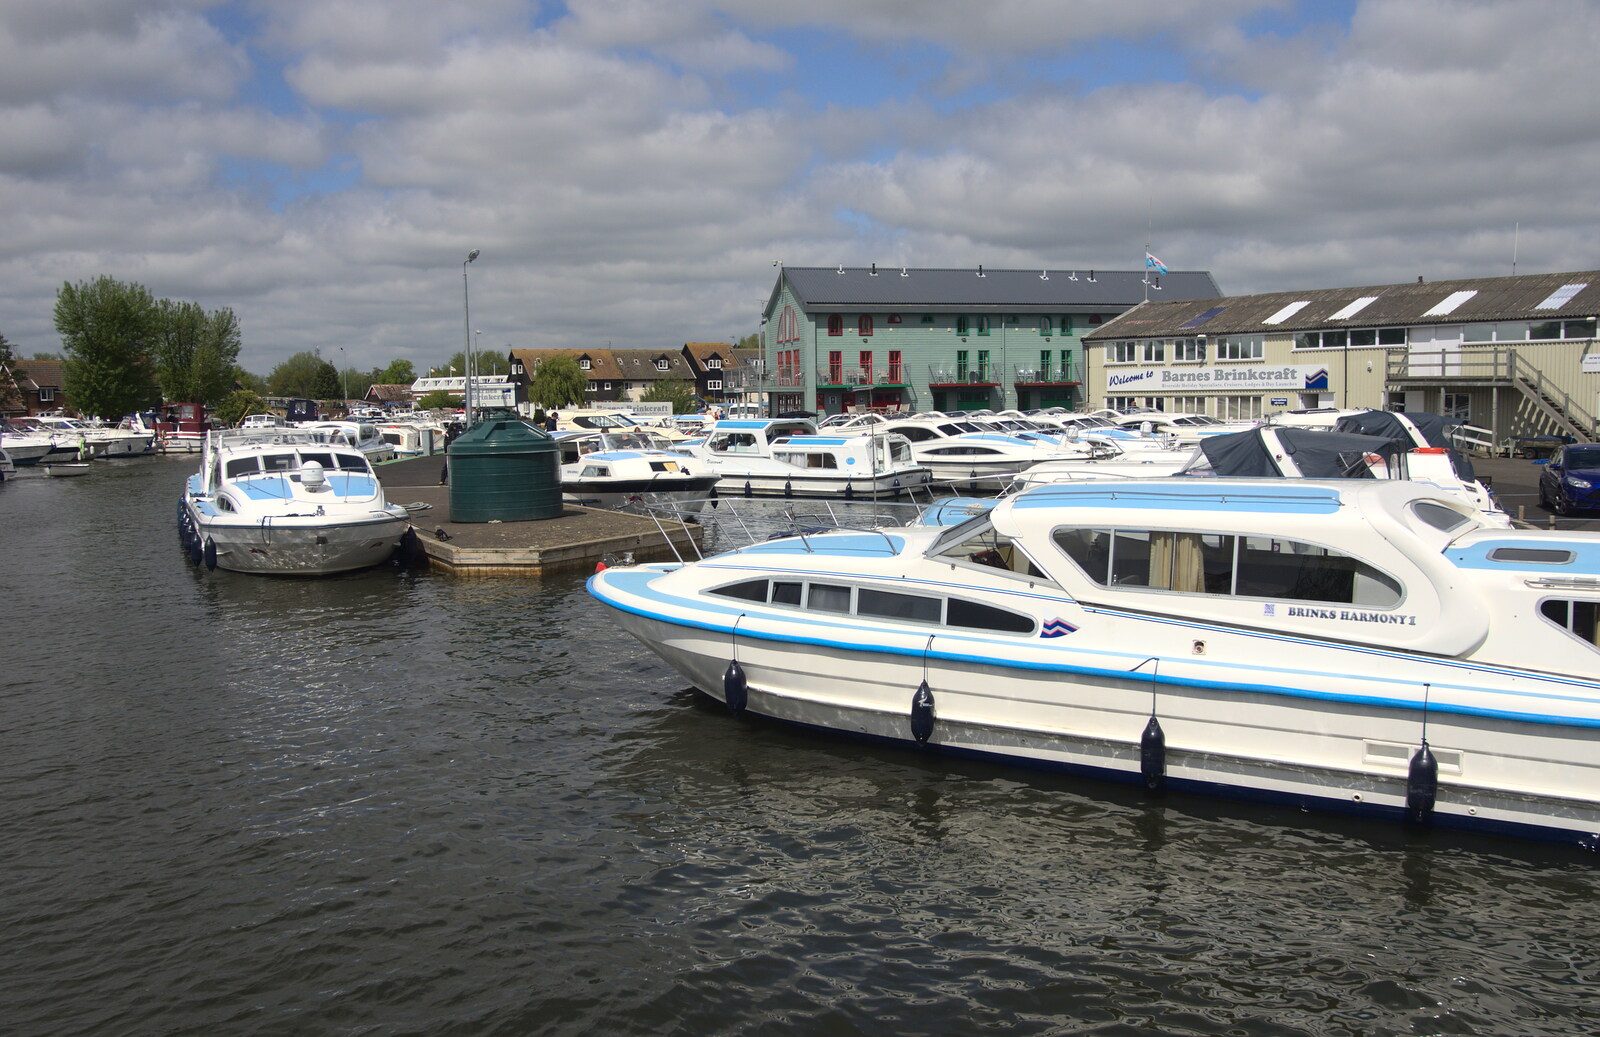 The Barnes Brinkcraft marina from A Trip on the Norfolk Broads, Wroxham, Norfolk - 25th May 2013